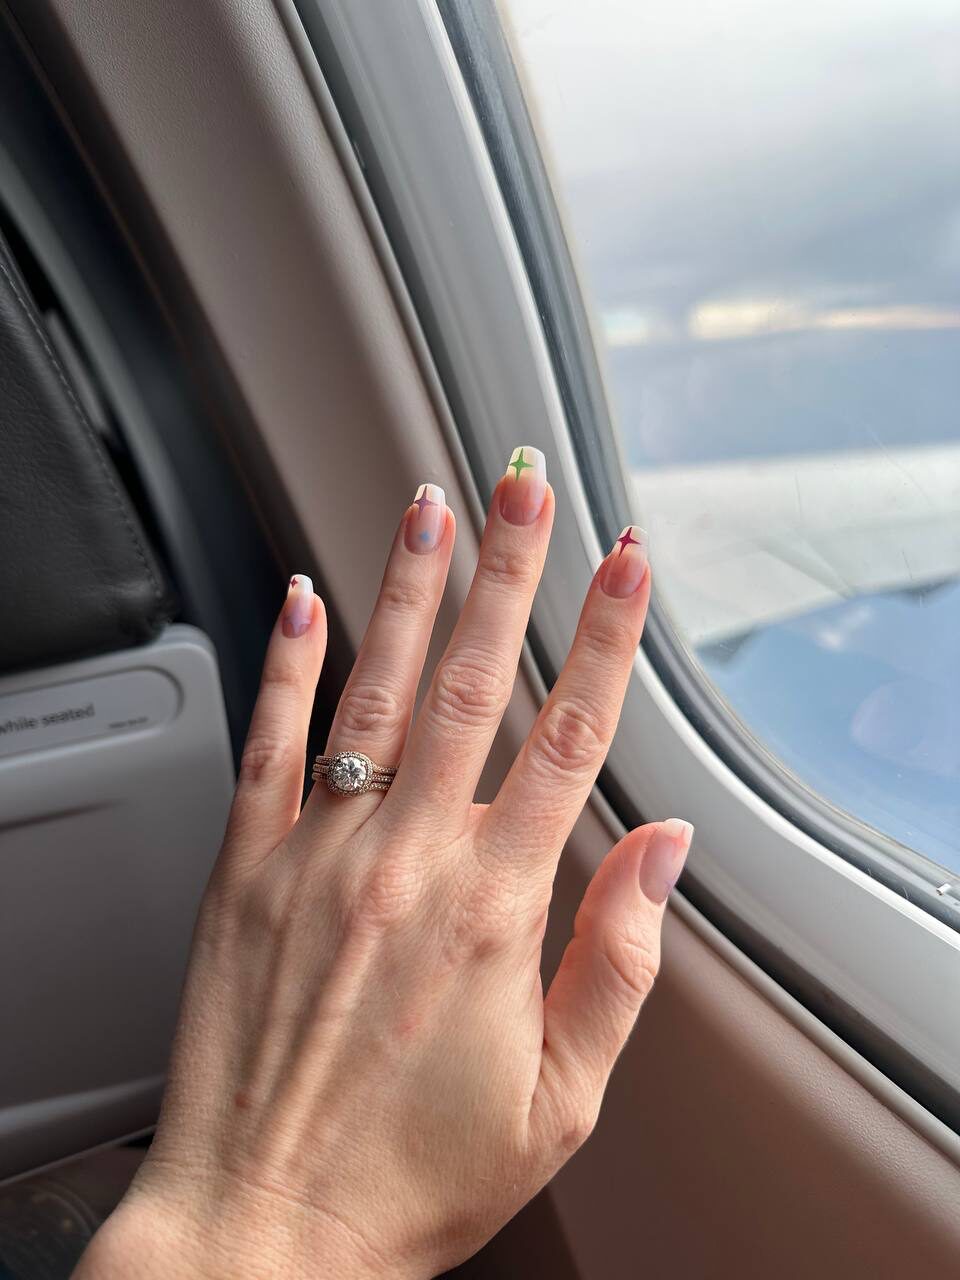 Best press on nails for vacation